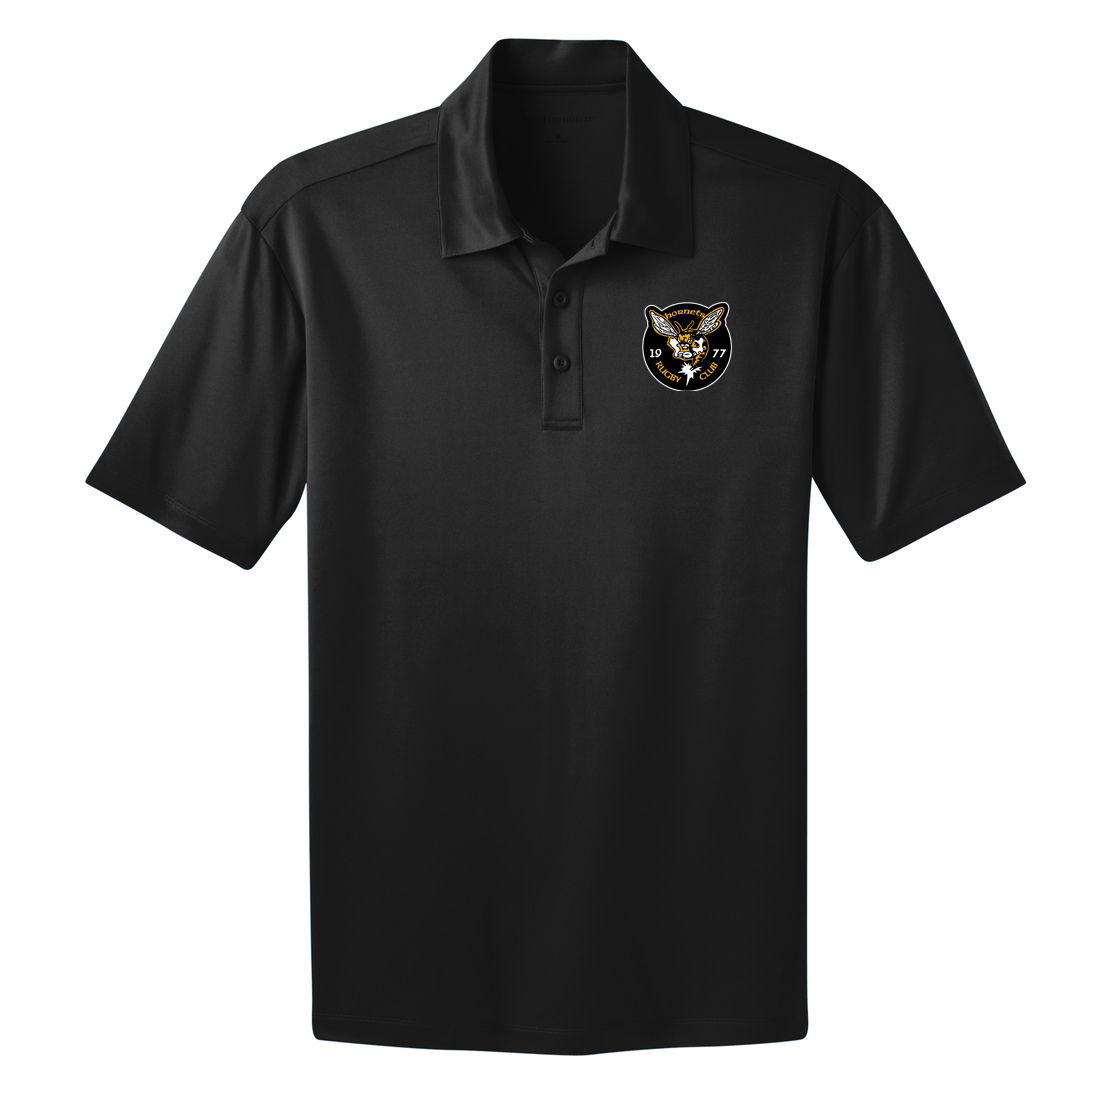 St. Louis Hornets Rugby Club Polo